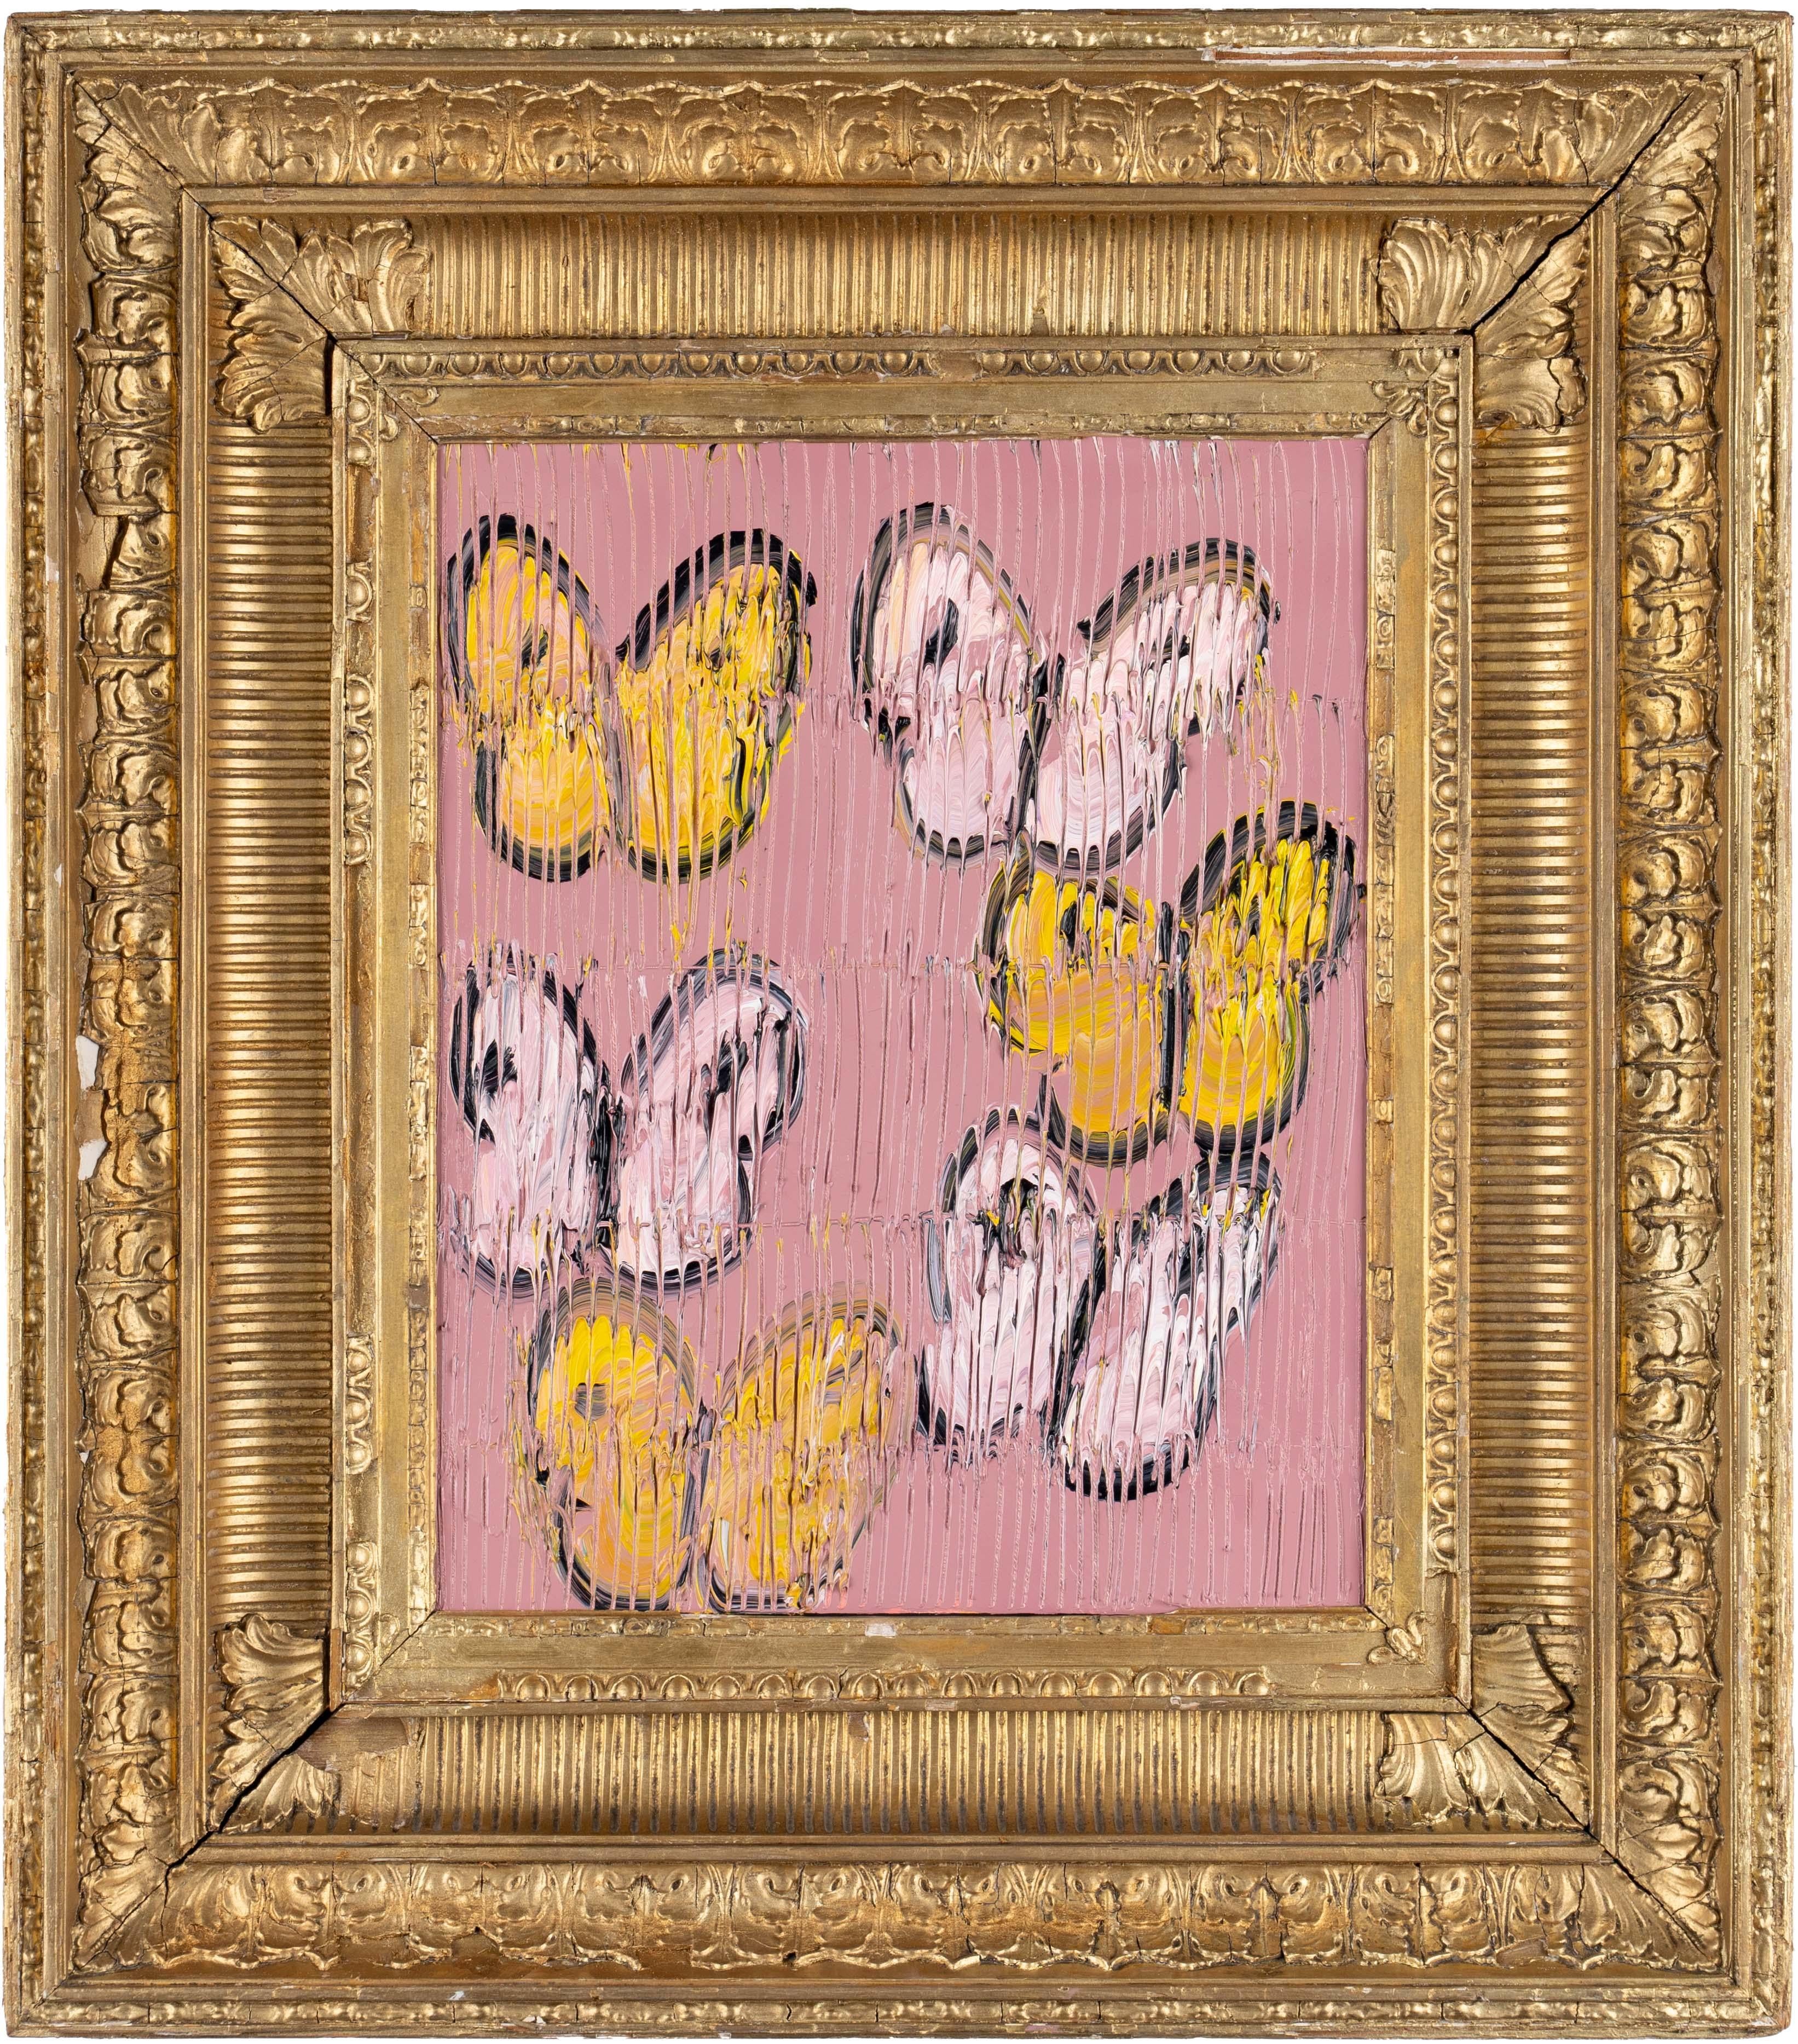 Hunt Slonem "Flight" Pink & Yellow Butterflies
Black outlined light pink and yellow butterflies on a pink etched background in a gold antique frame.

Unframed: 15 x 12 inches
Framed: 26 x 23 inches
*Painting is framed - Please note Hunt Slonem